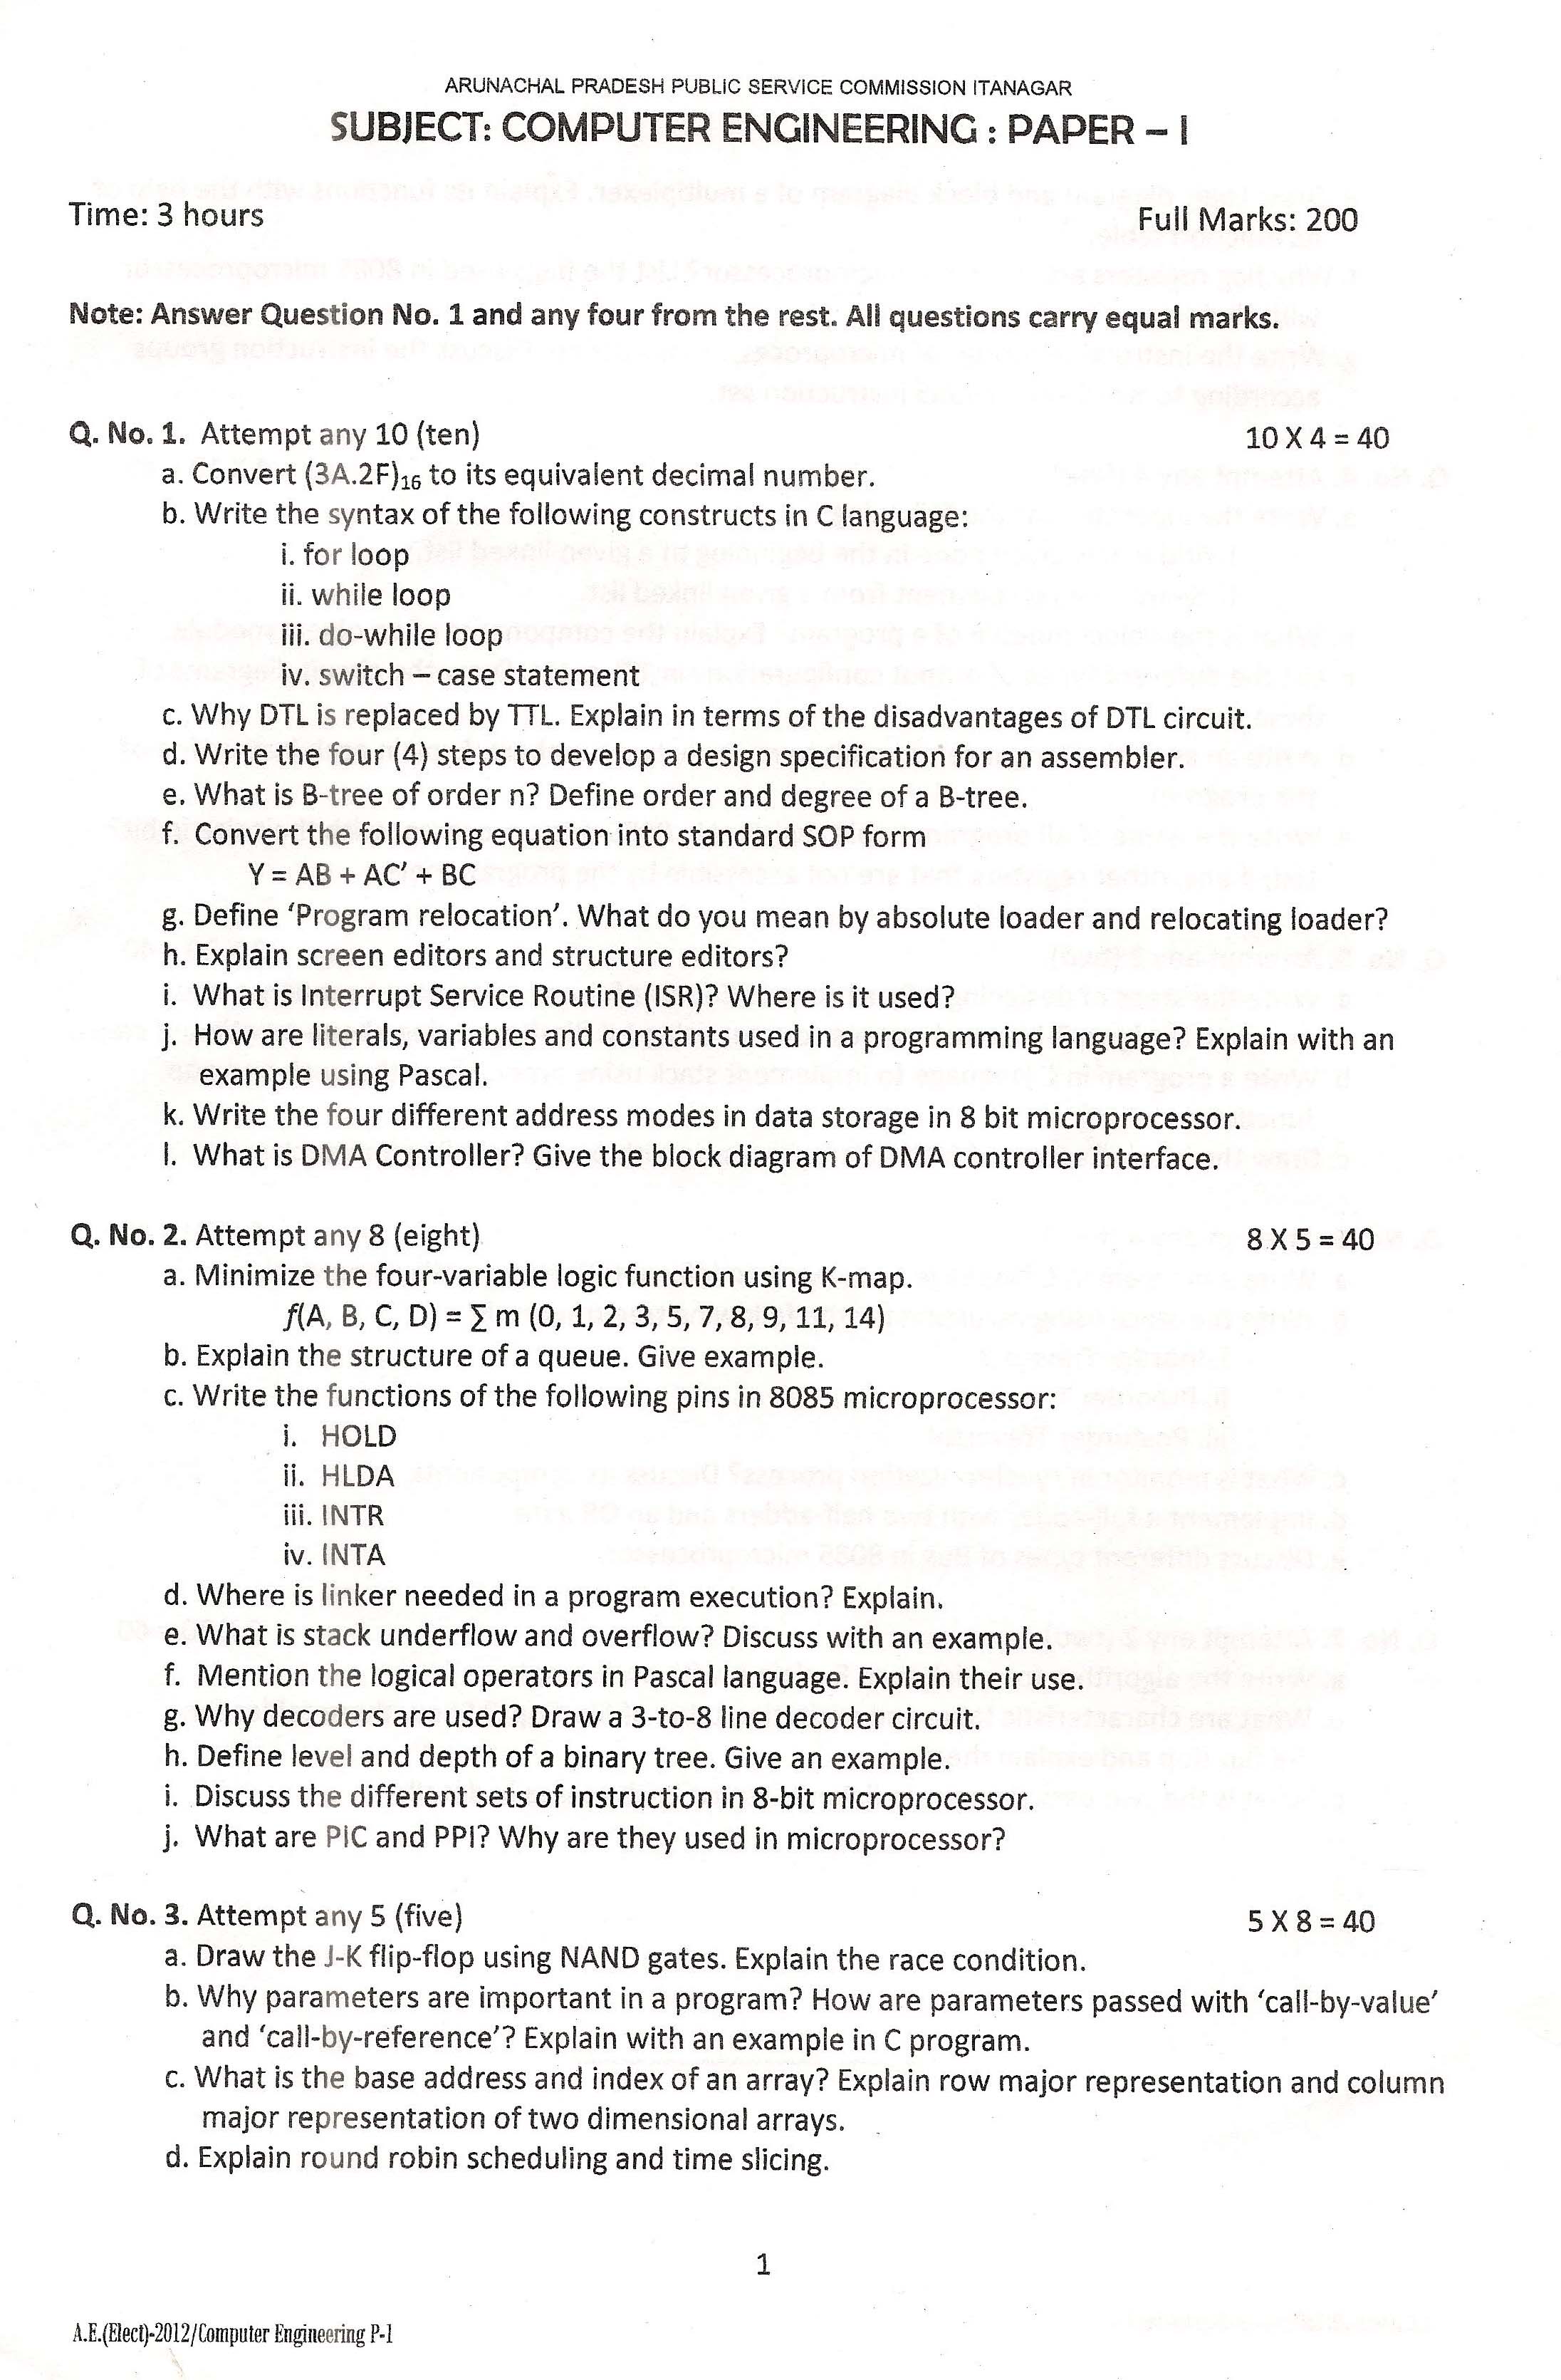 APPSC AE Electrical Computer Engineering Paper I 2012 1